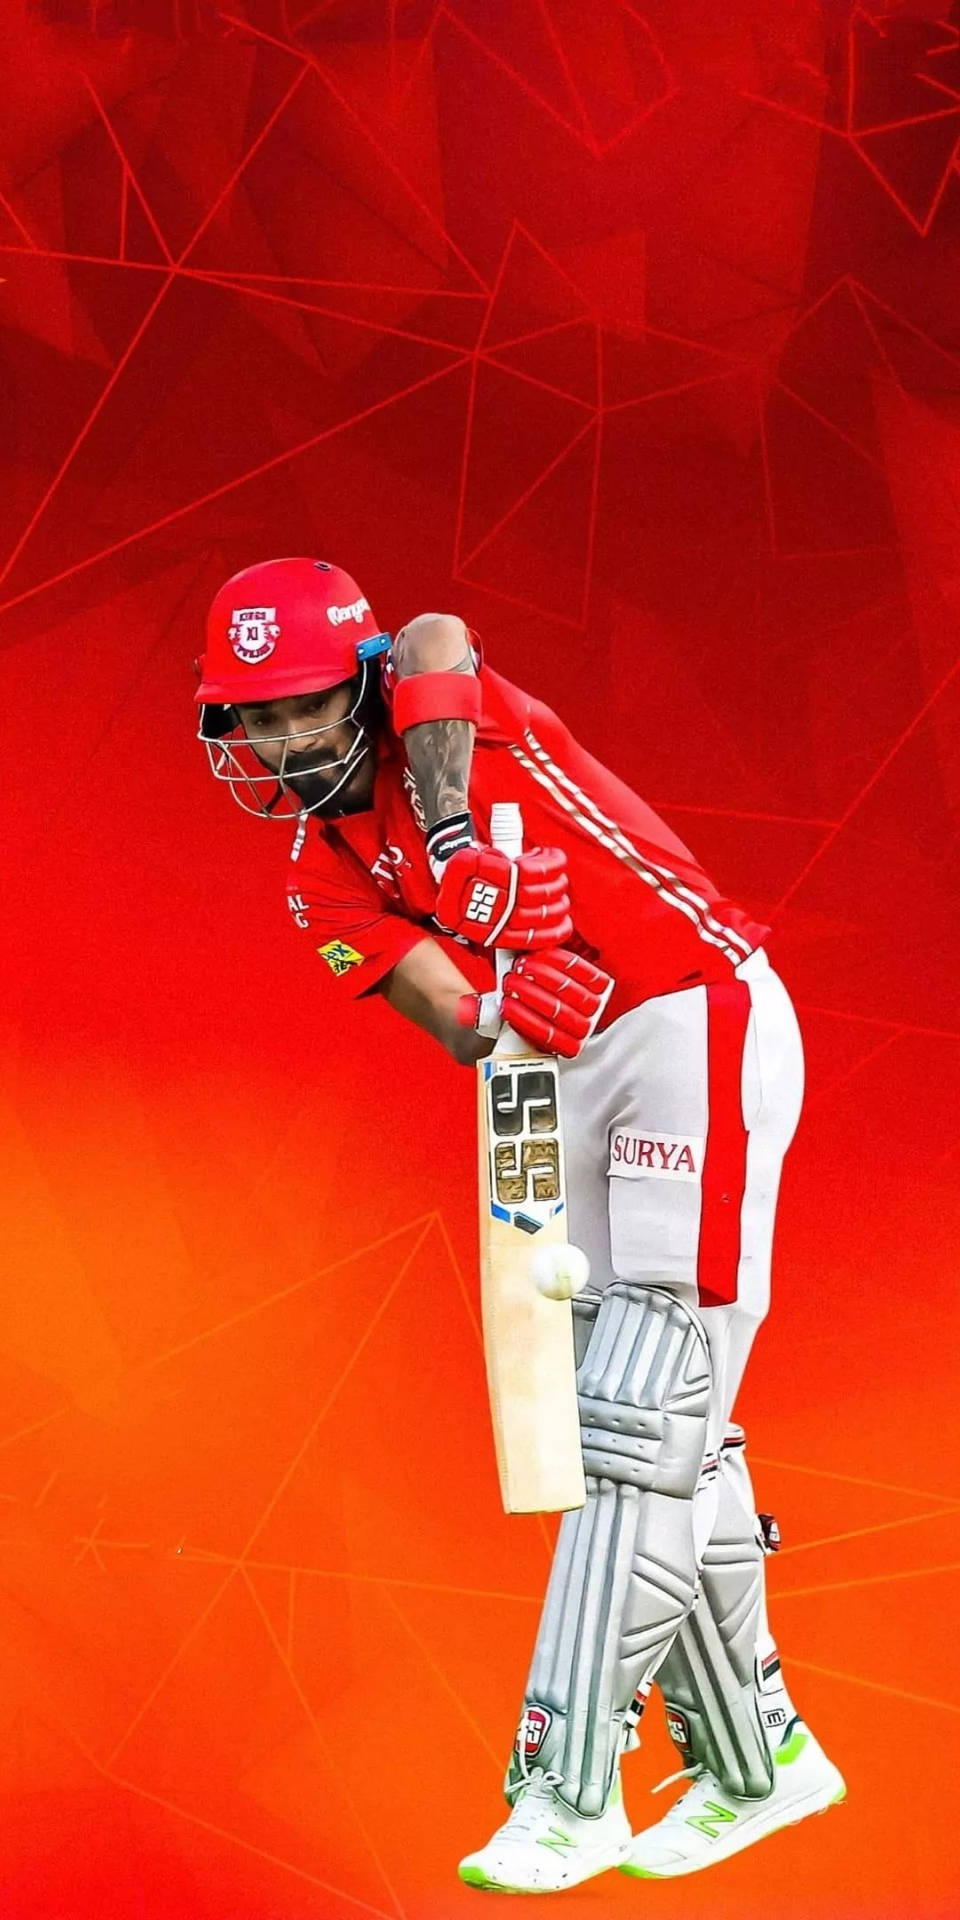 Frenetic Action On The Ipl 2021 Pitch Wallpaper